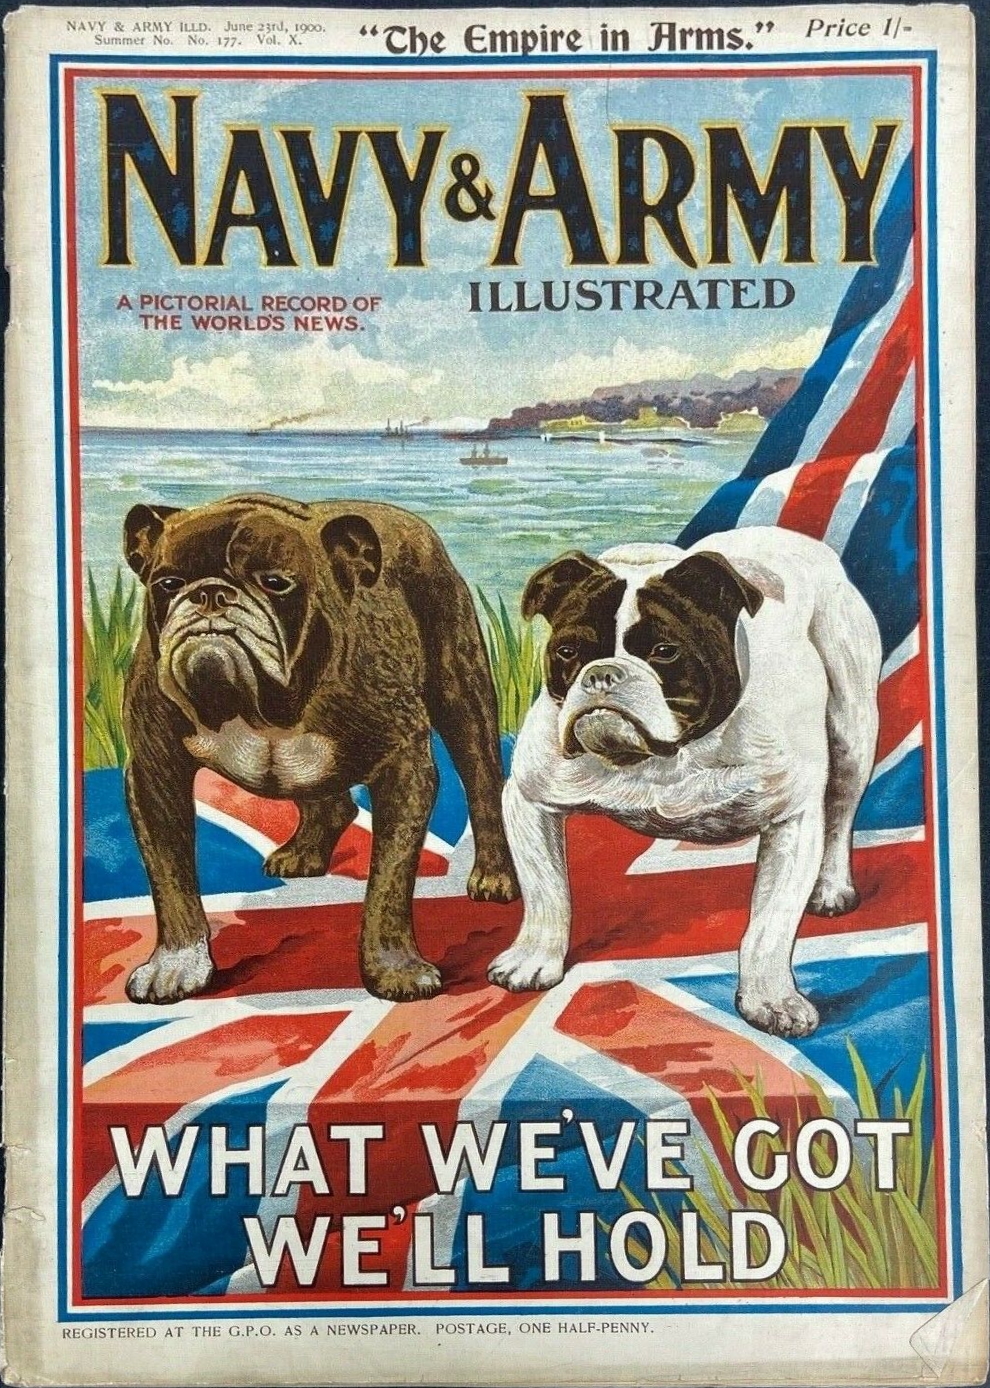 The Navy & Army Illustrated - June 23 1900